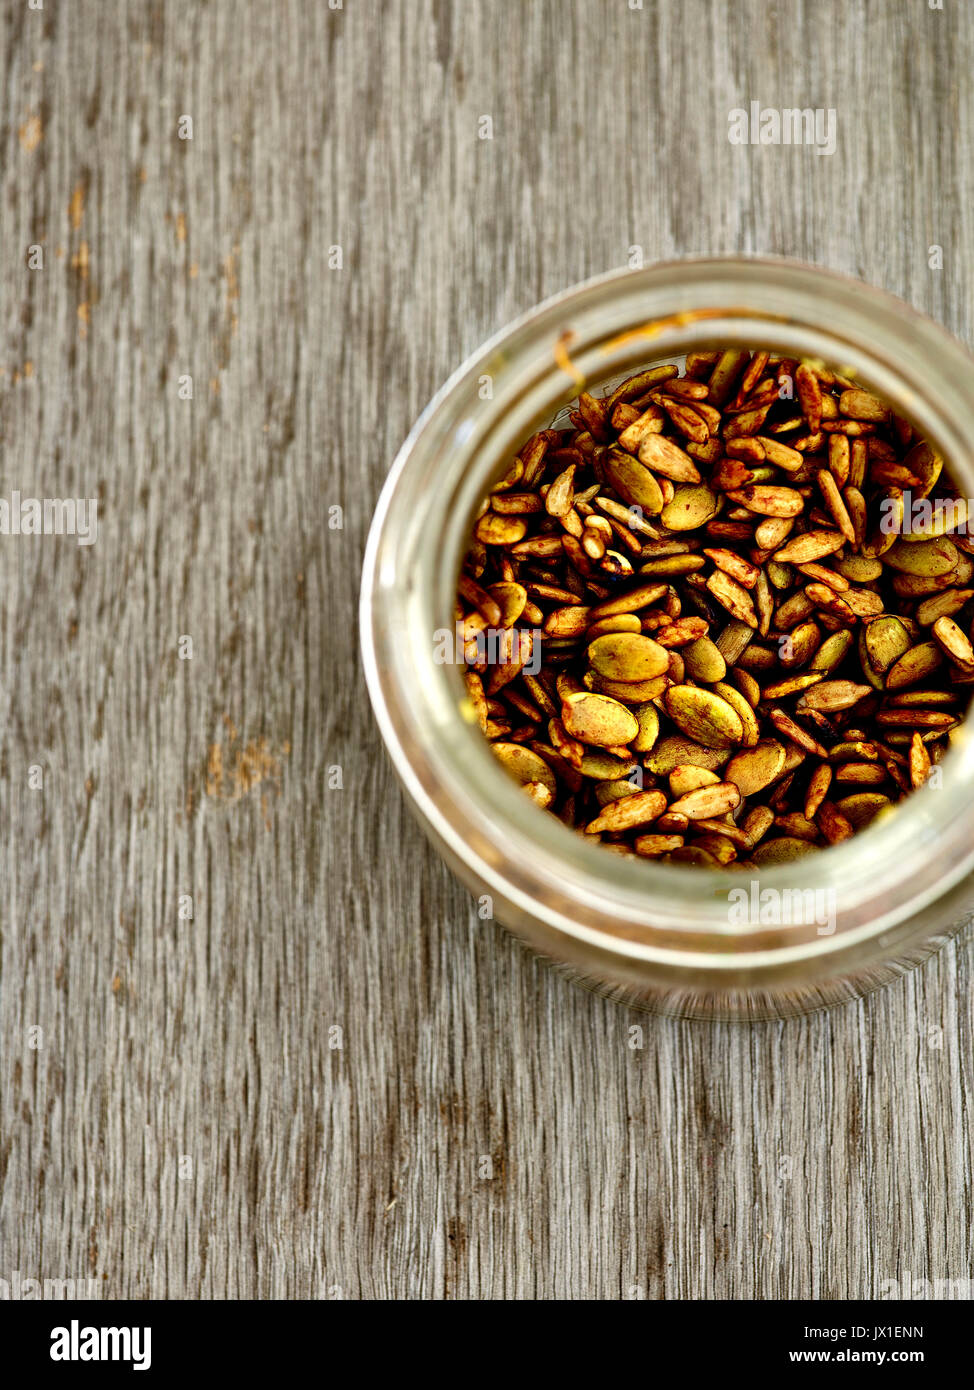 Toasted pumpkin and sunflower seed Stock Photo